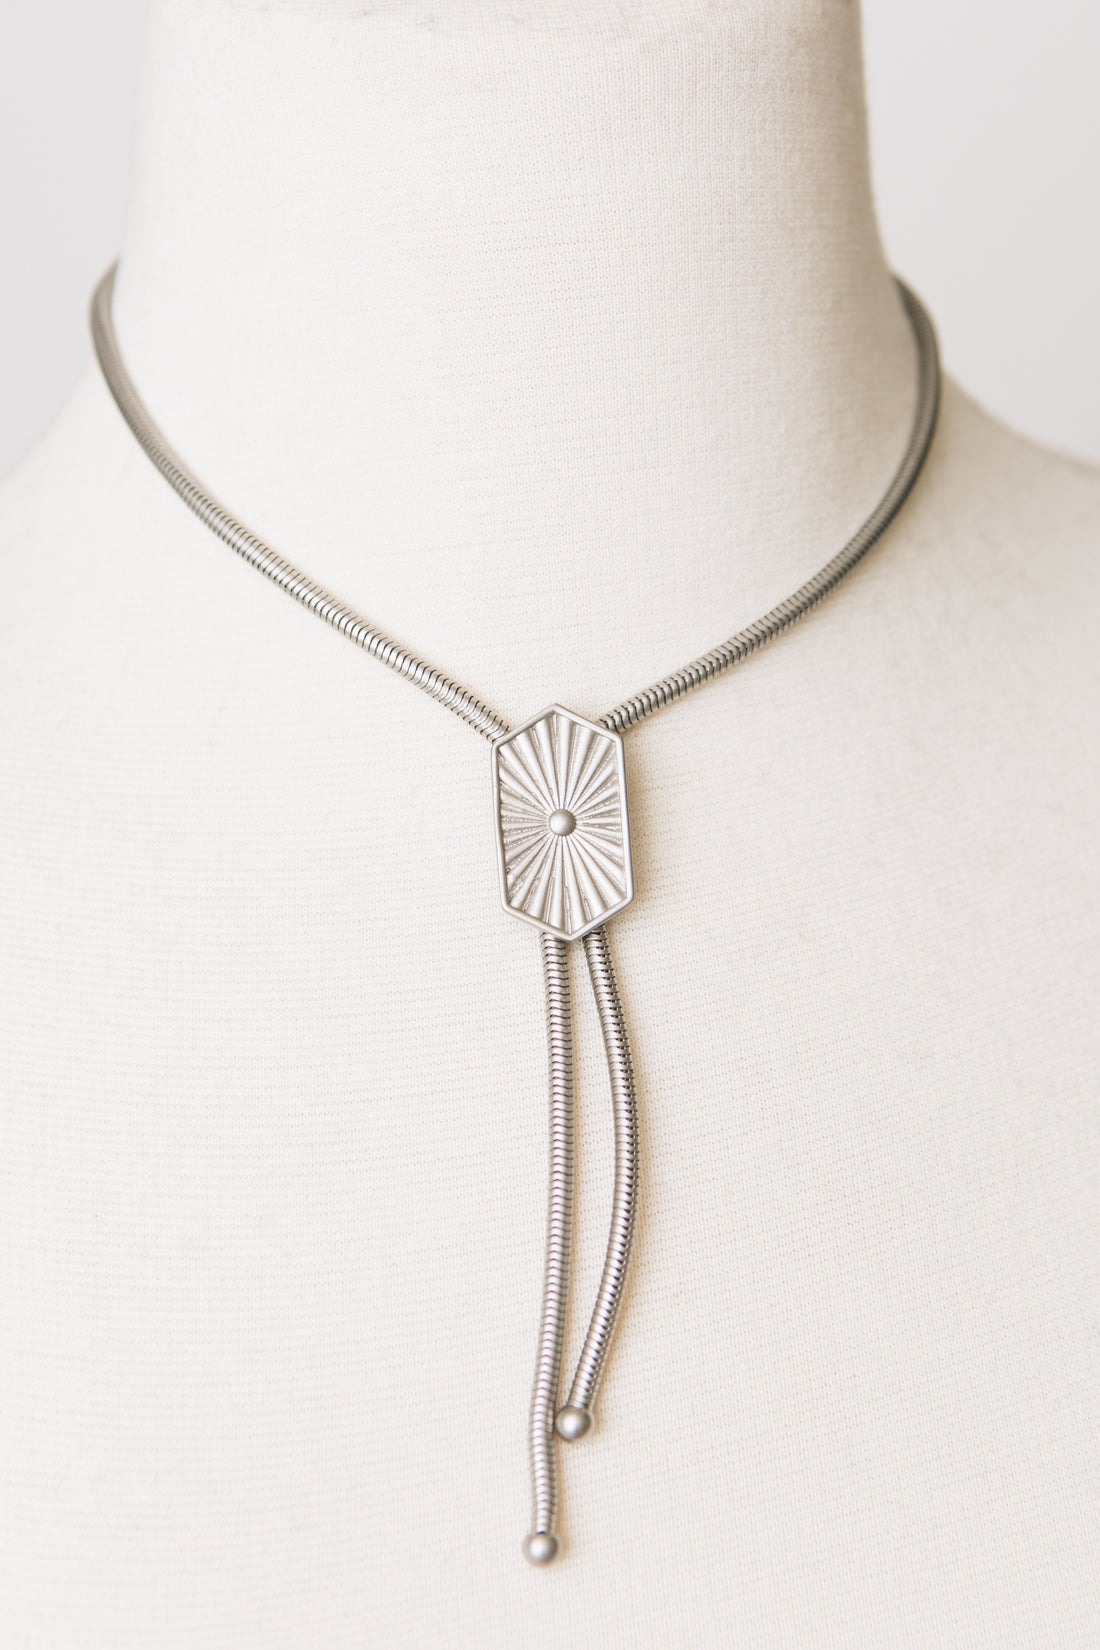 Oak & Ivy - Waterproof Bolo Necklave with Sun Ray Pendant